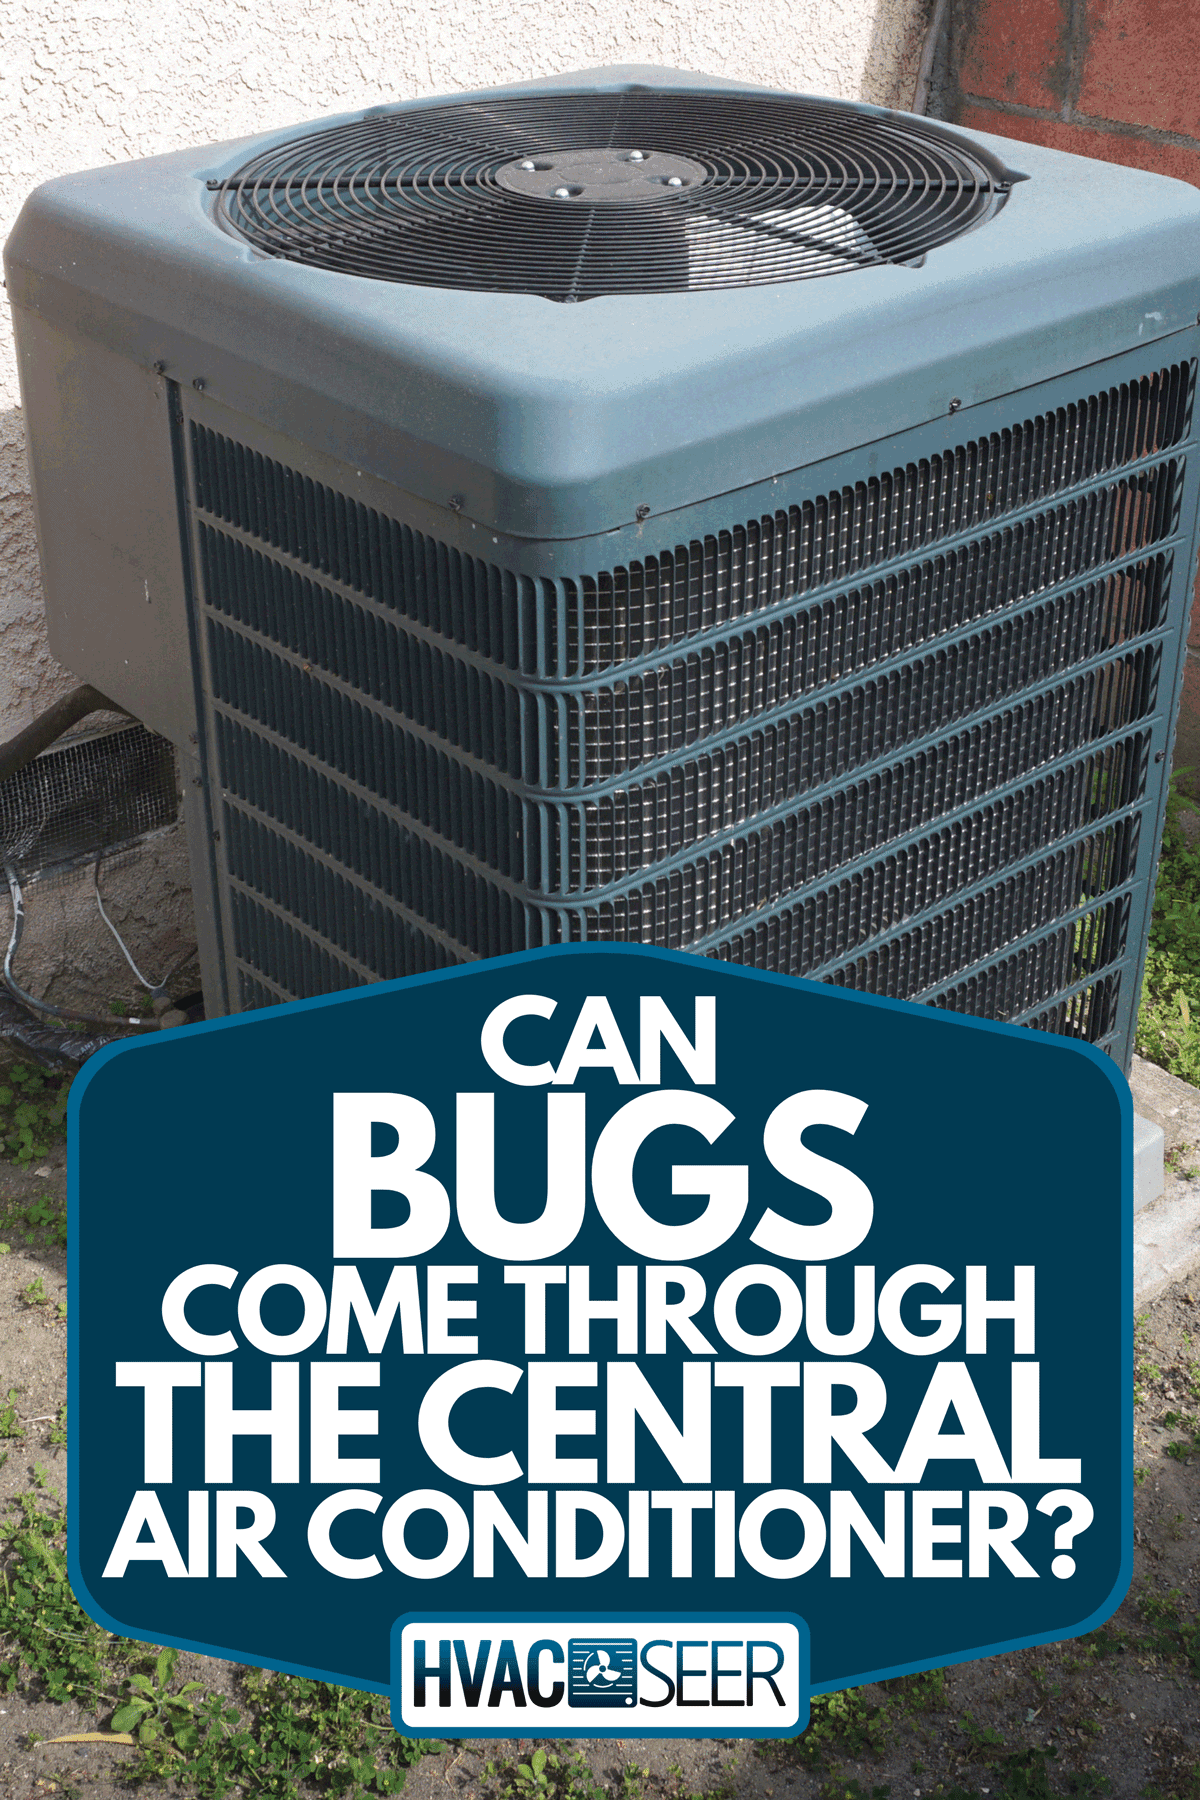 An outdoor air conditioning unit, Can Bugs Come Through The Central Air Conditioner?